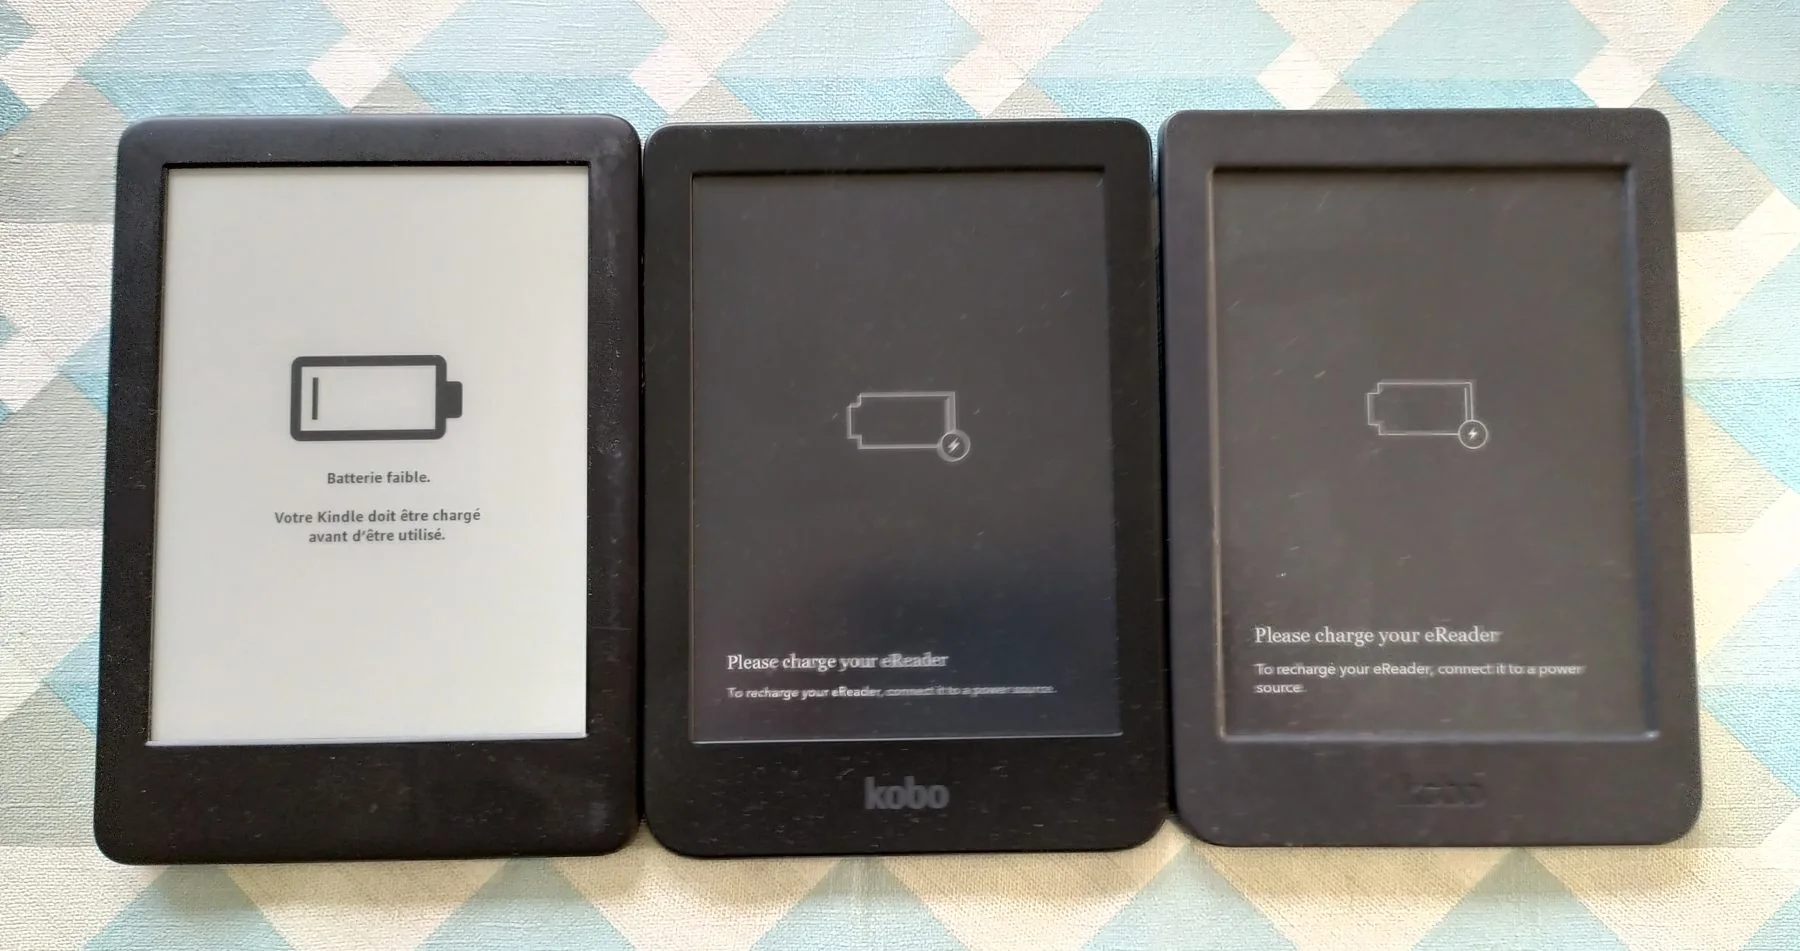 E-reader tips to boost battery life in your ebook reader